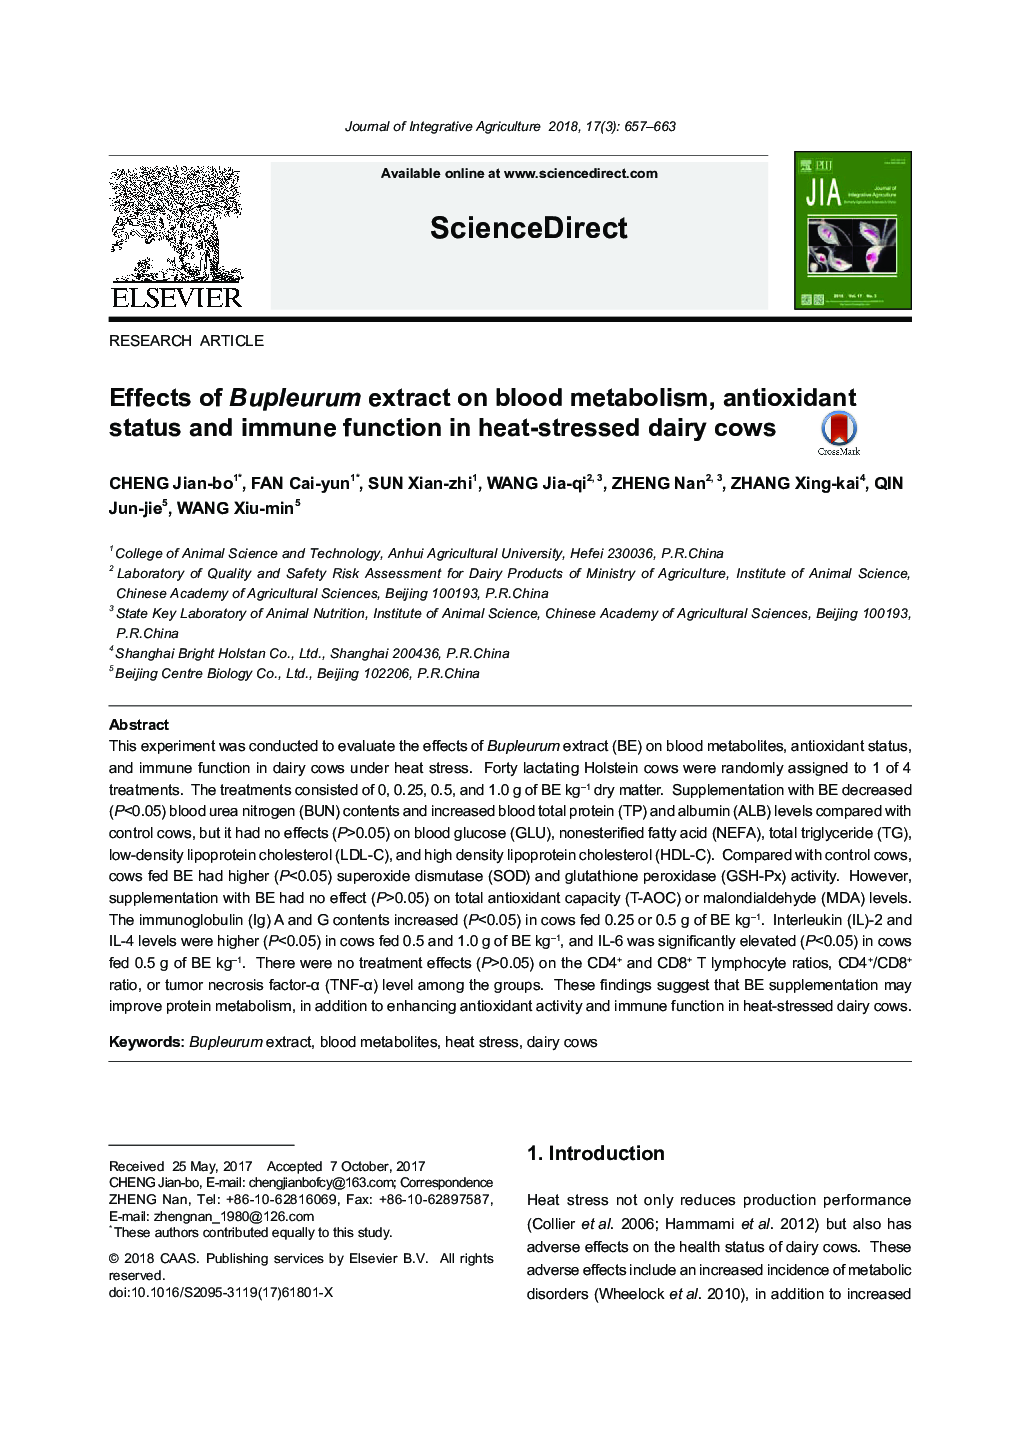 Effects of Bupleurum extract on blood metabolism, antioxidant status and immune function in heat-stressed dairy cows